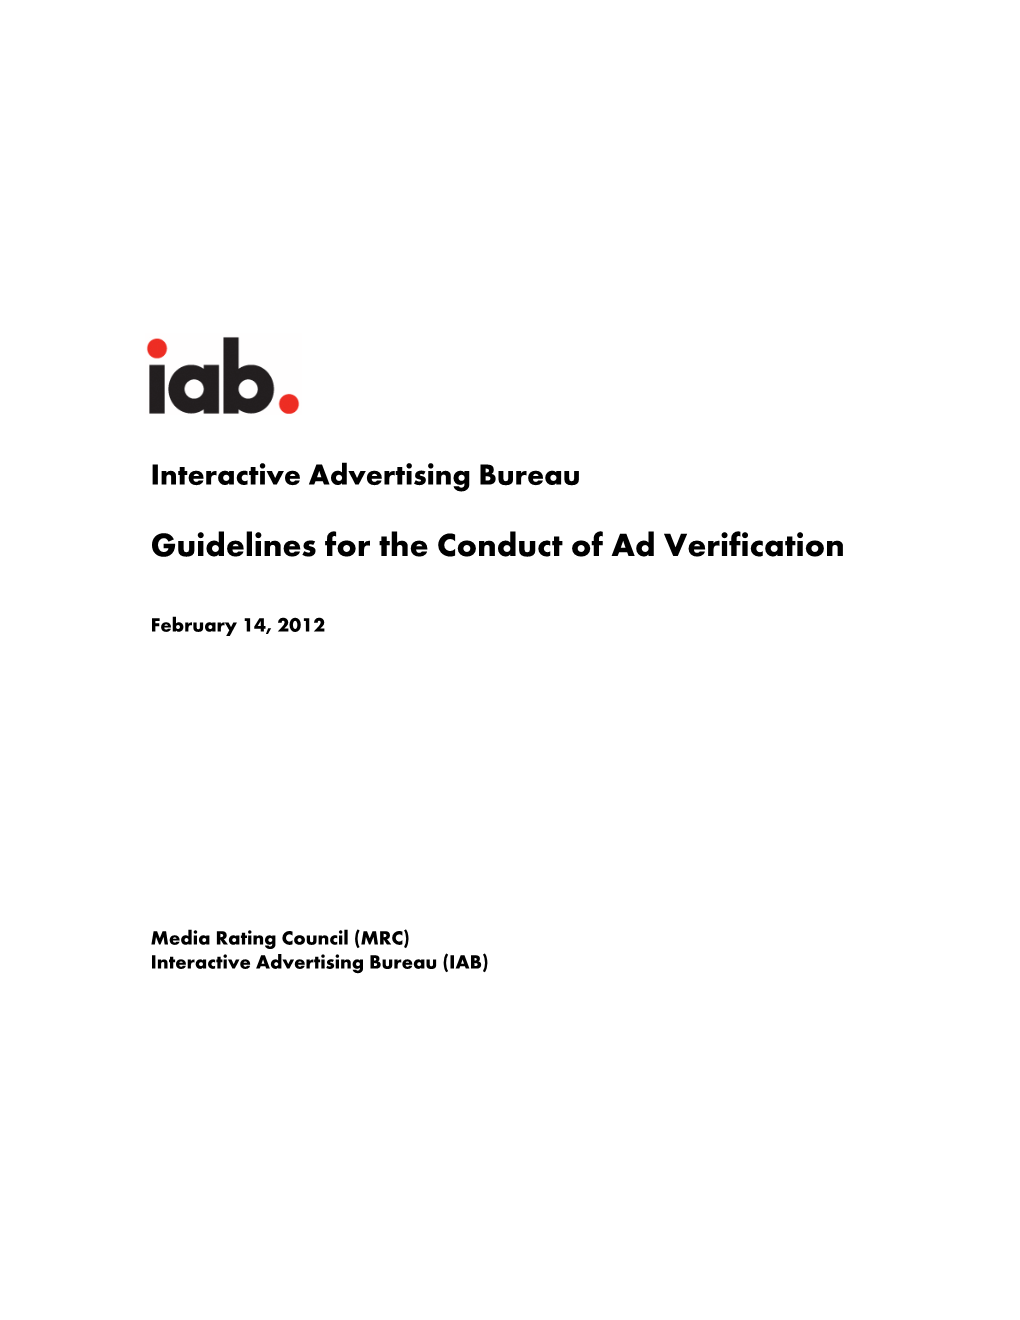 IAB Guidelines for the Conduct of Ad Verification